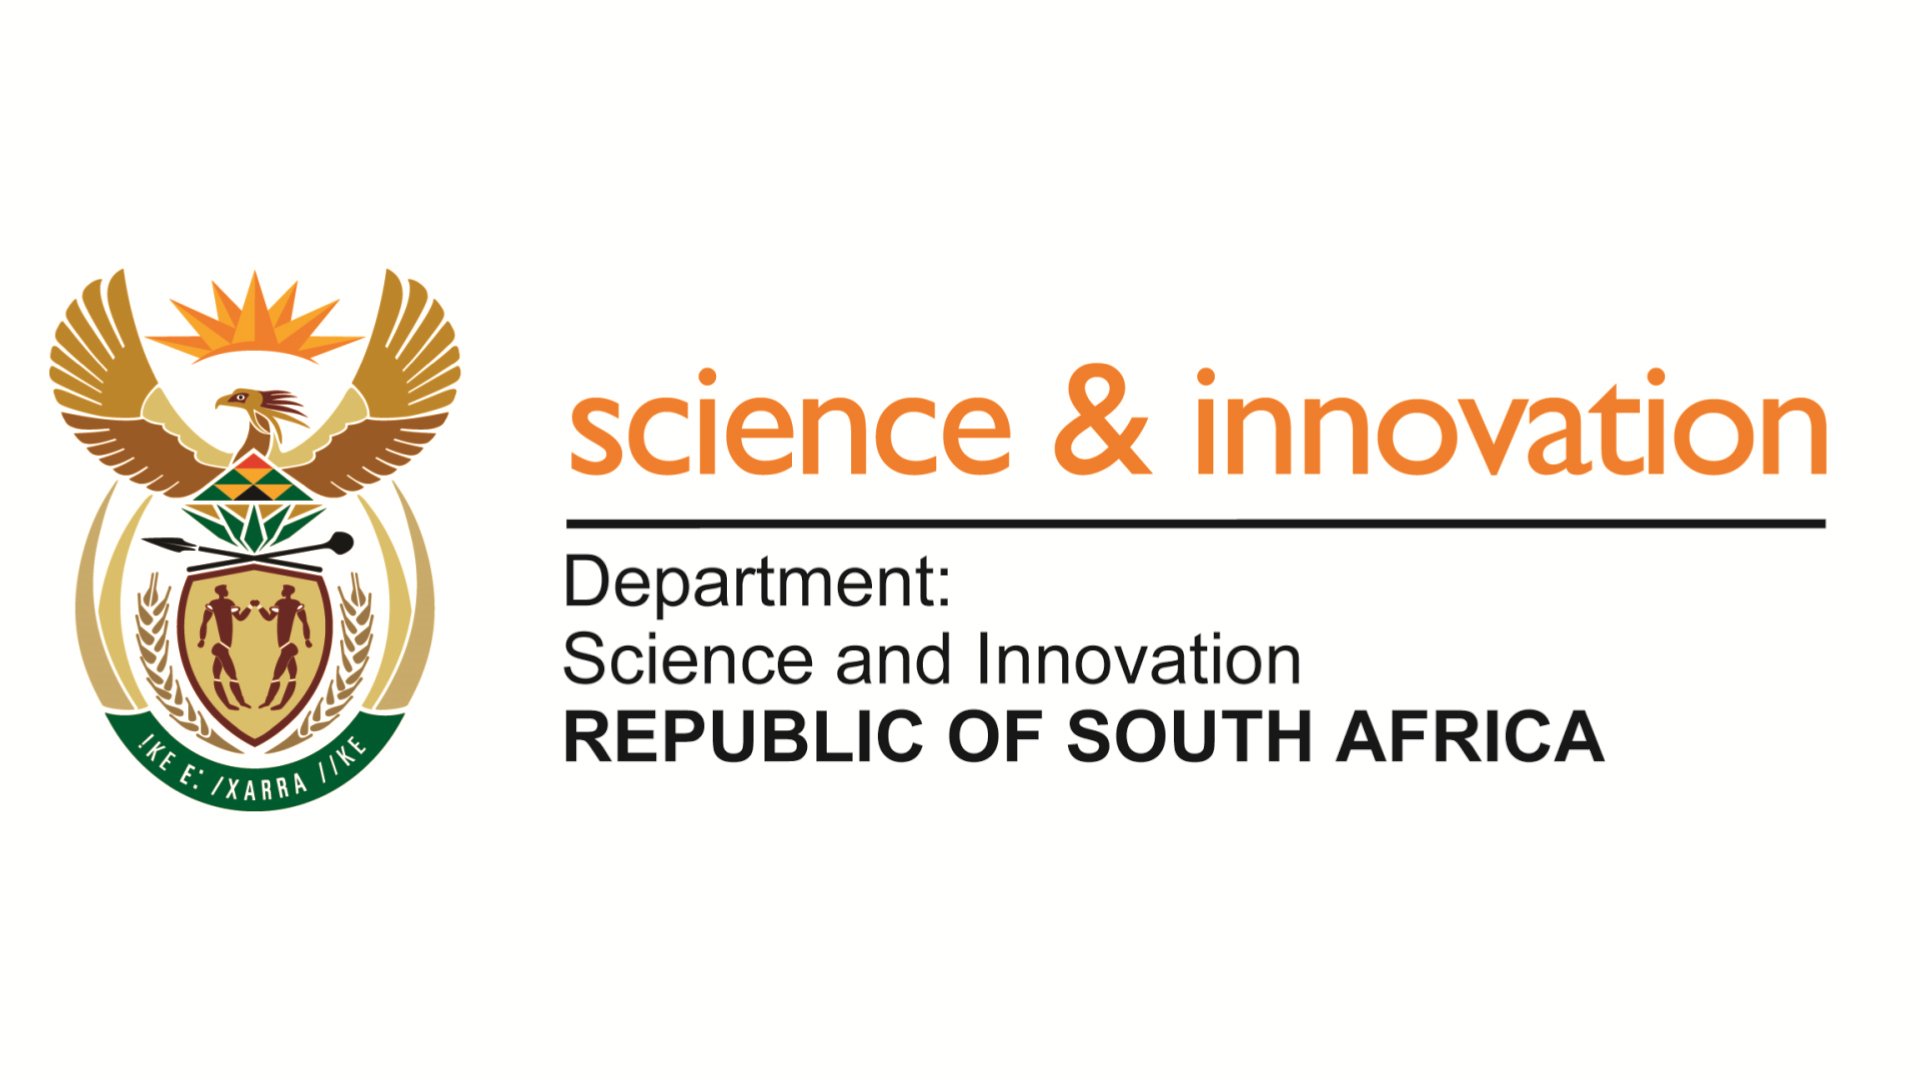 Department of Science and Innovation (South Africa)